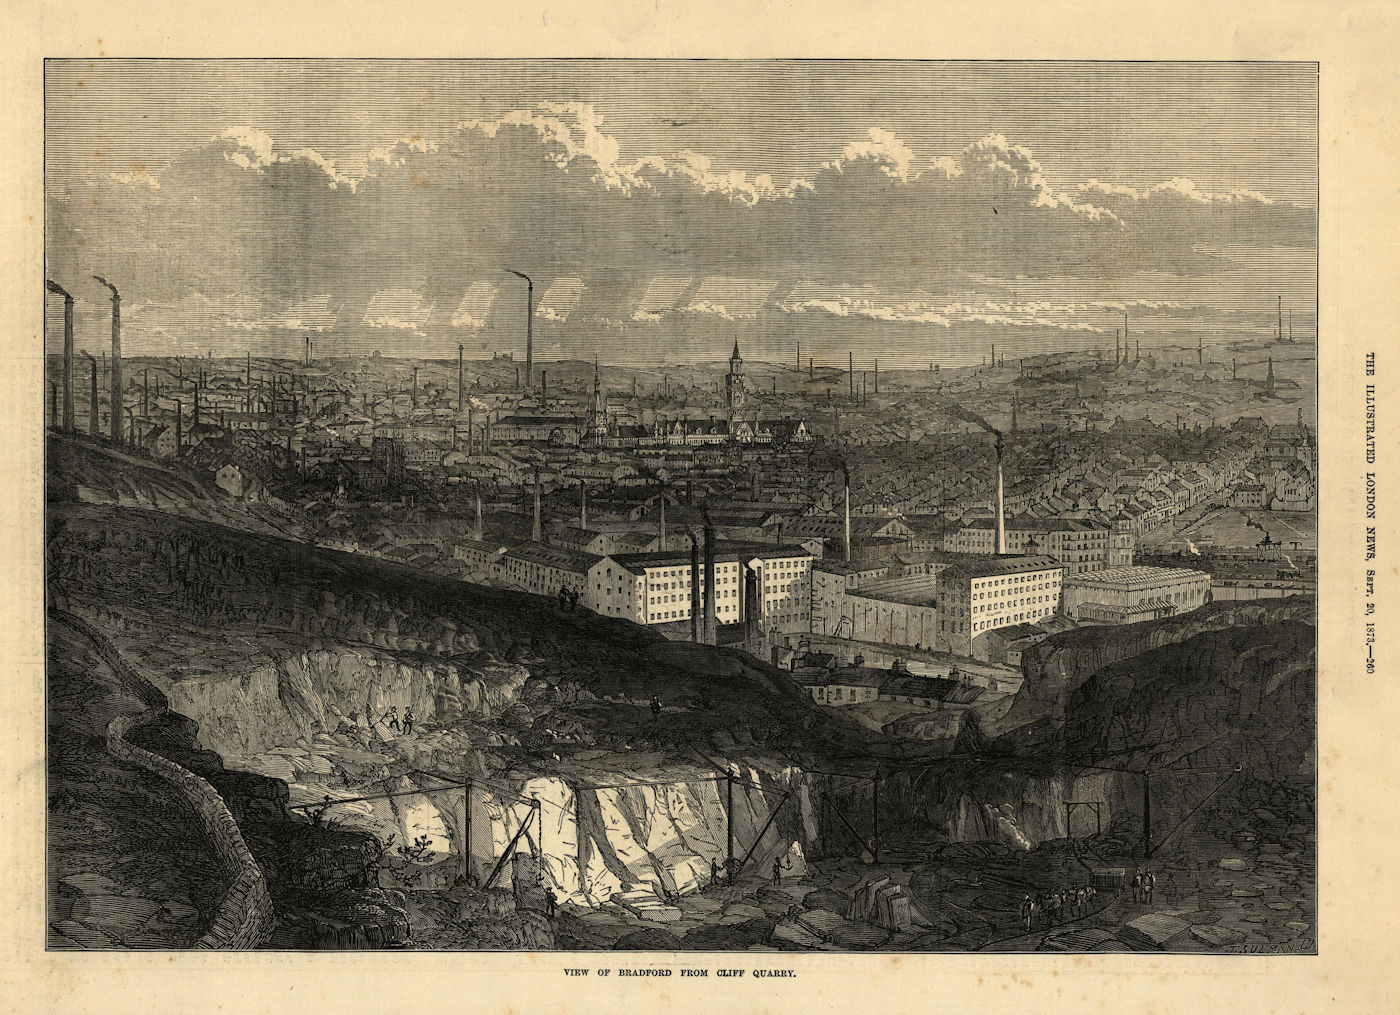 Associate Product View of Bradford from Cliff Quarry. Yorkshire 1873 antique ILN full page print